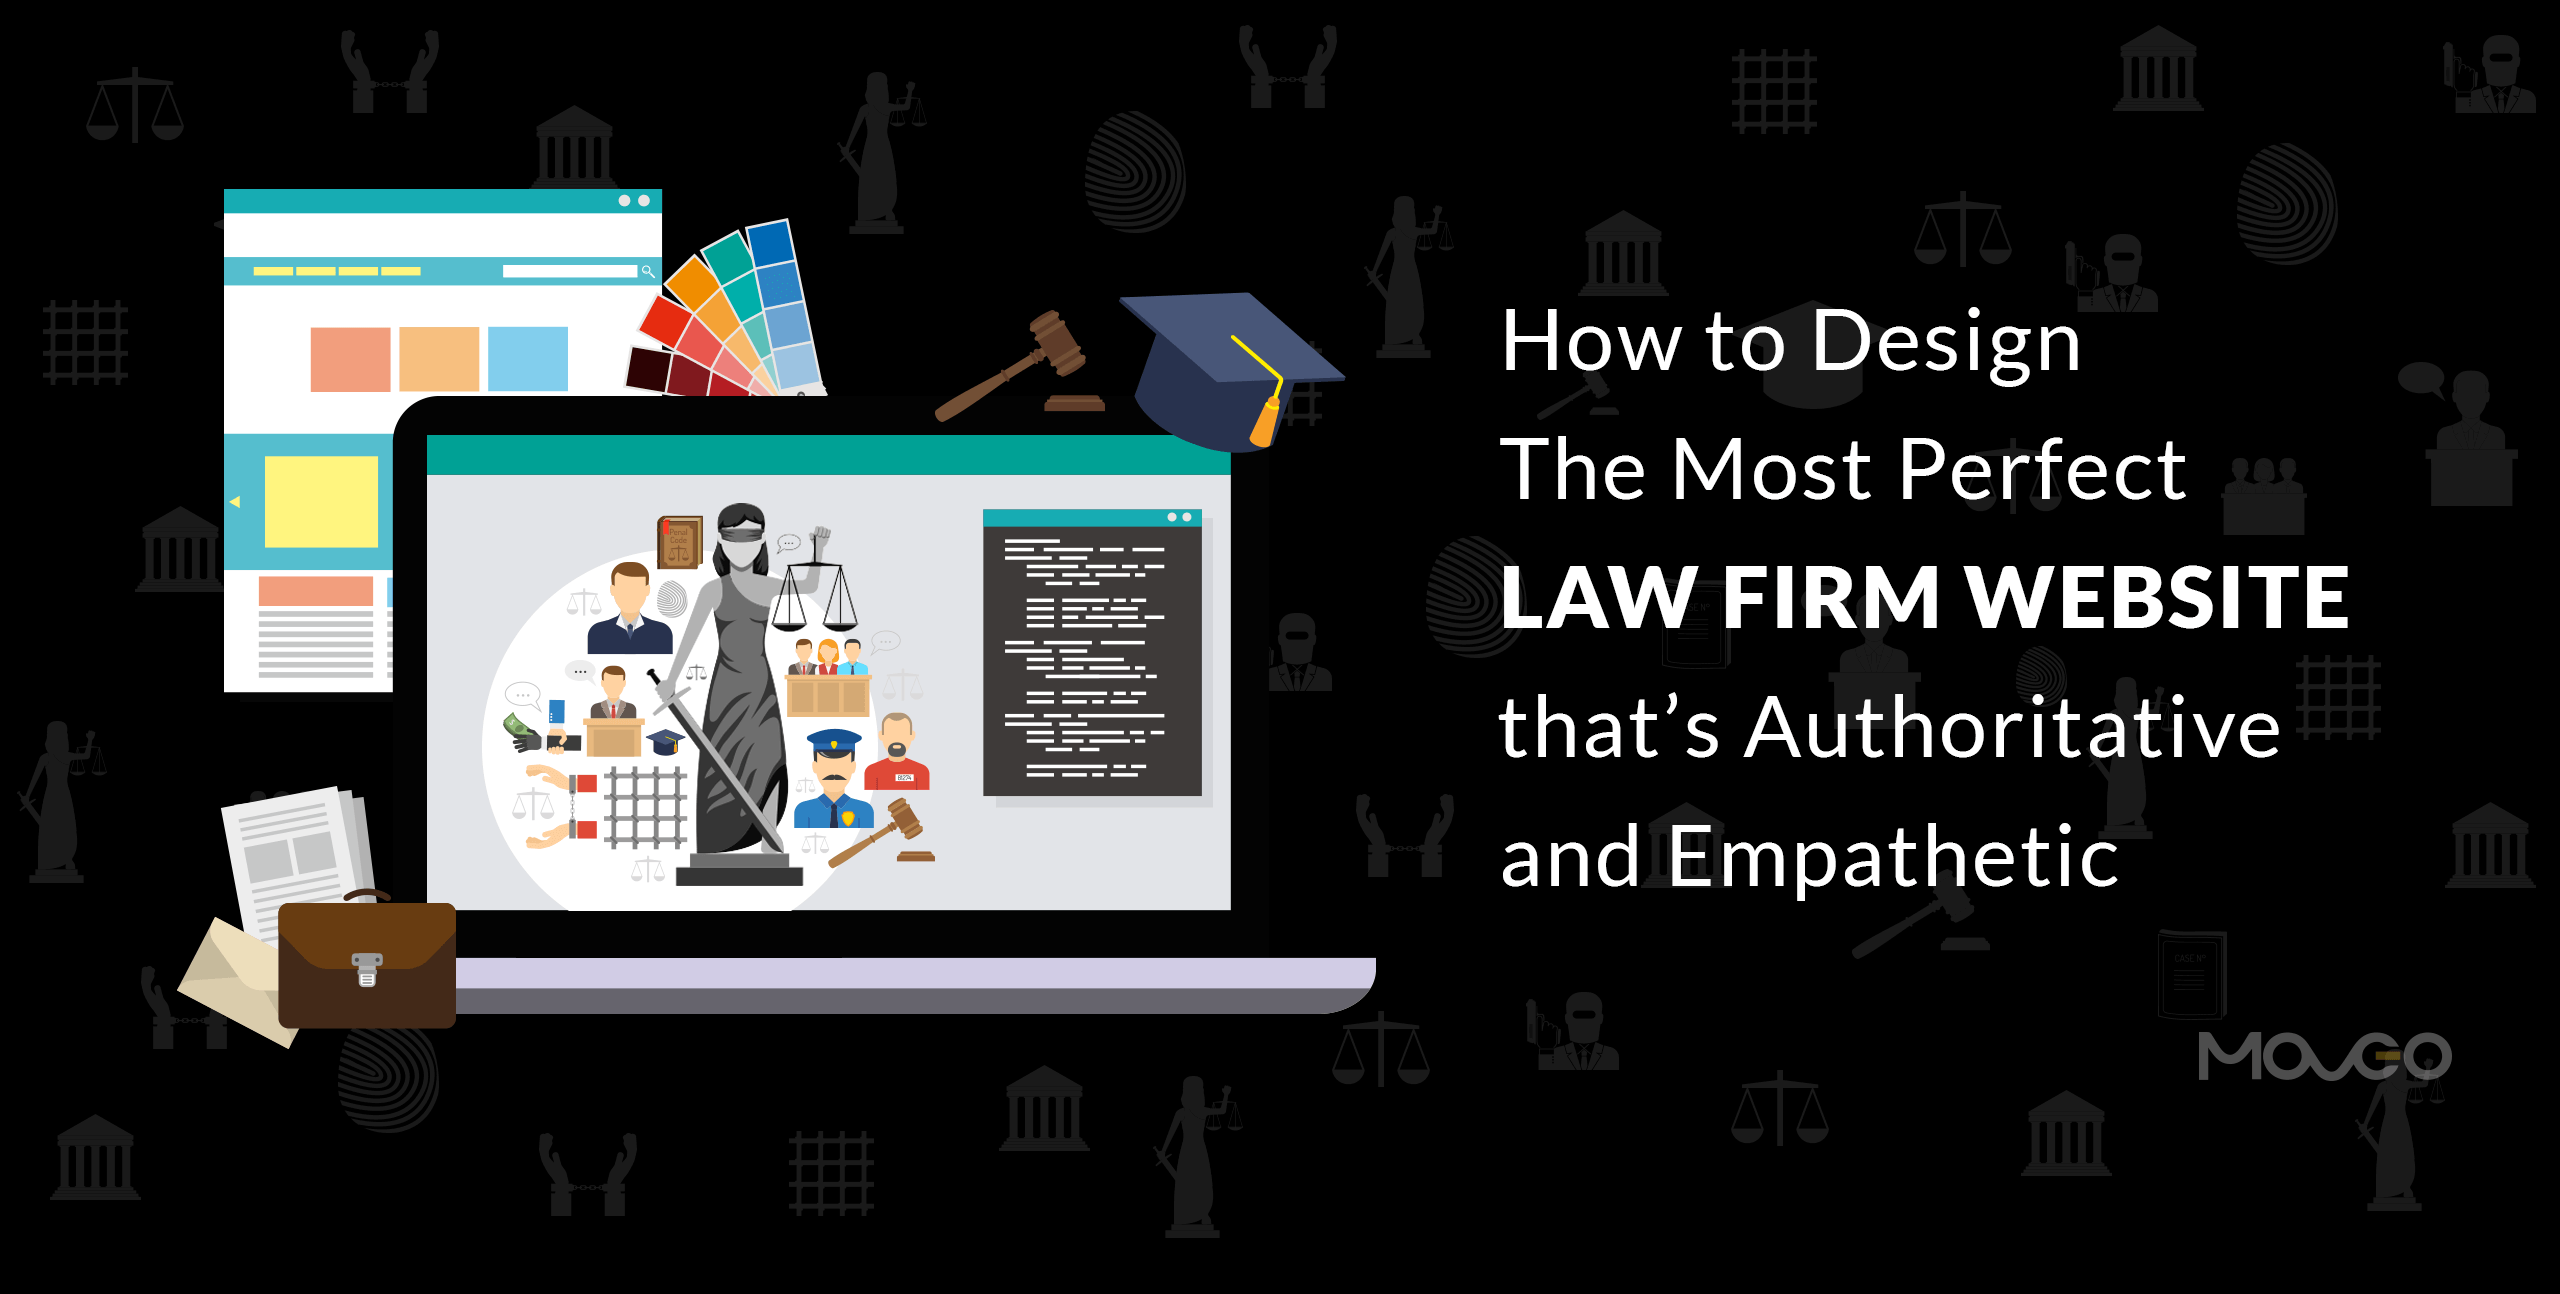 Do law firms need a website?